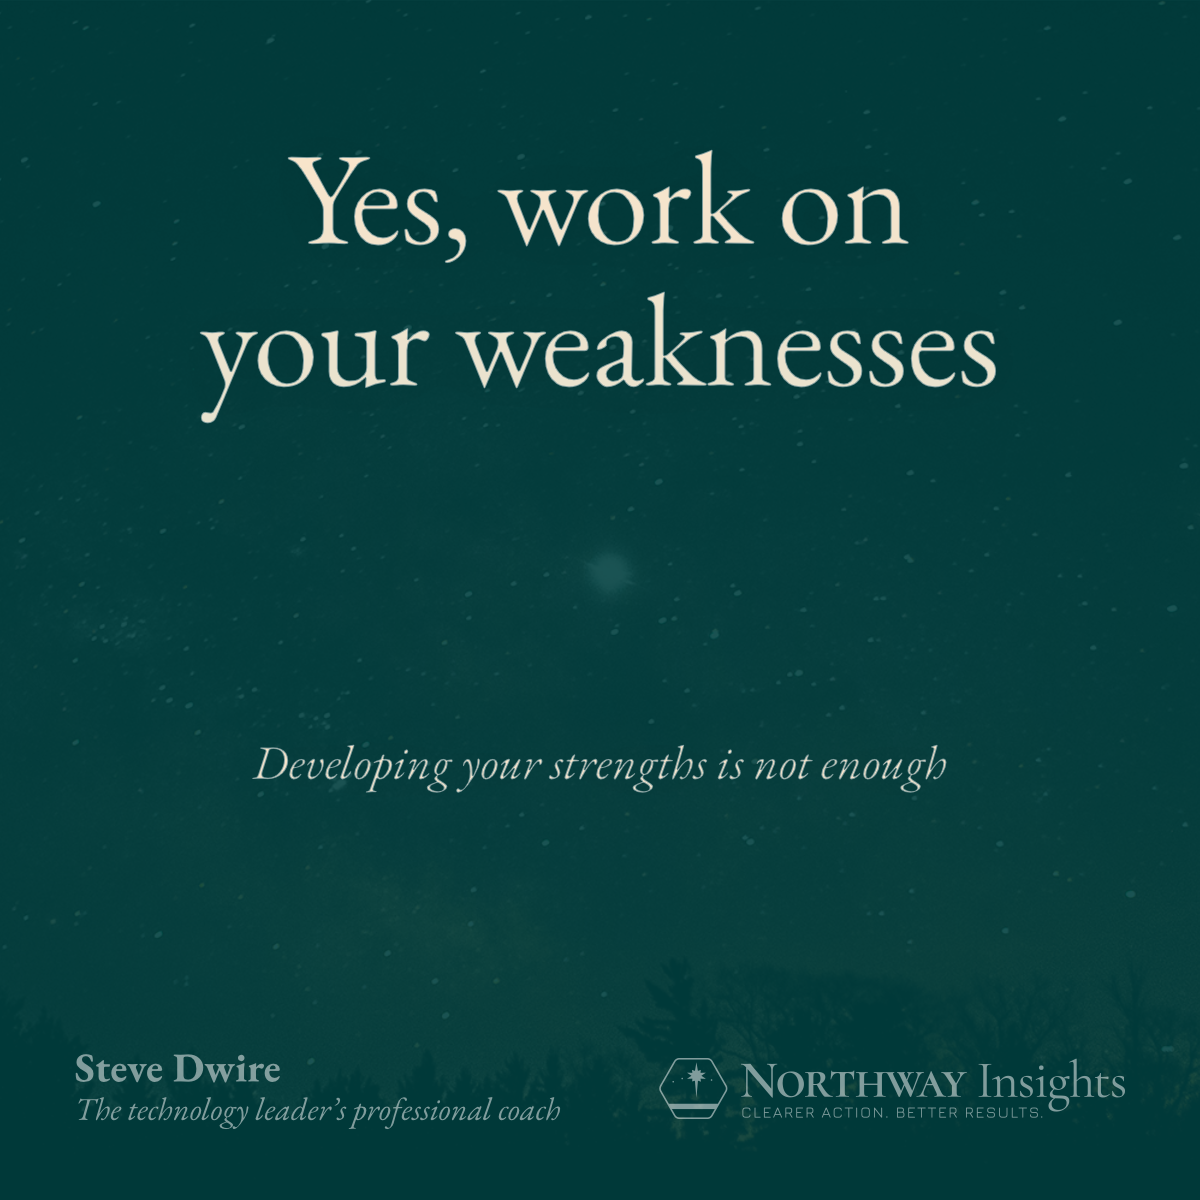 Yes, work on your weaknesses (Developing your strengths is not enough)